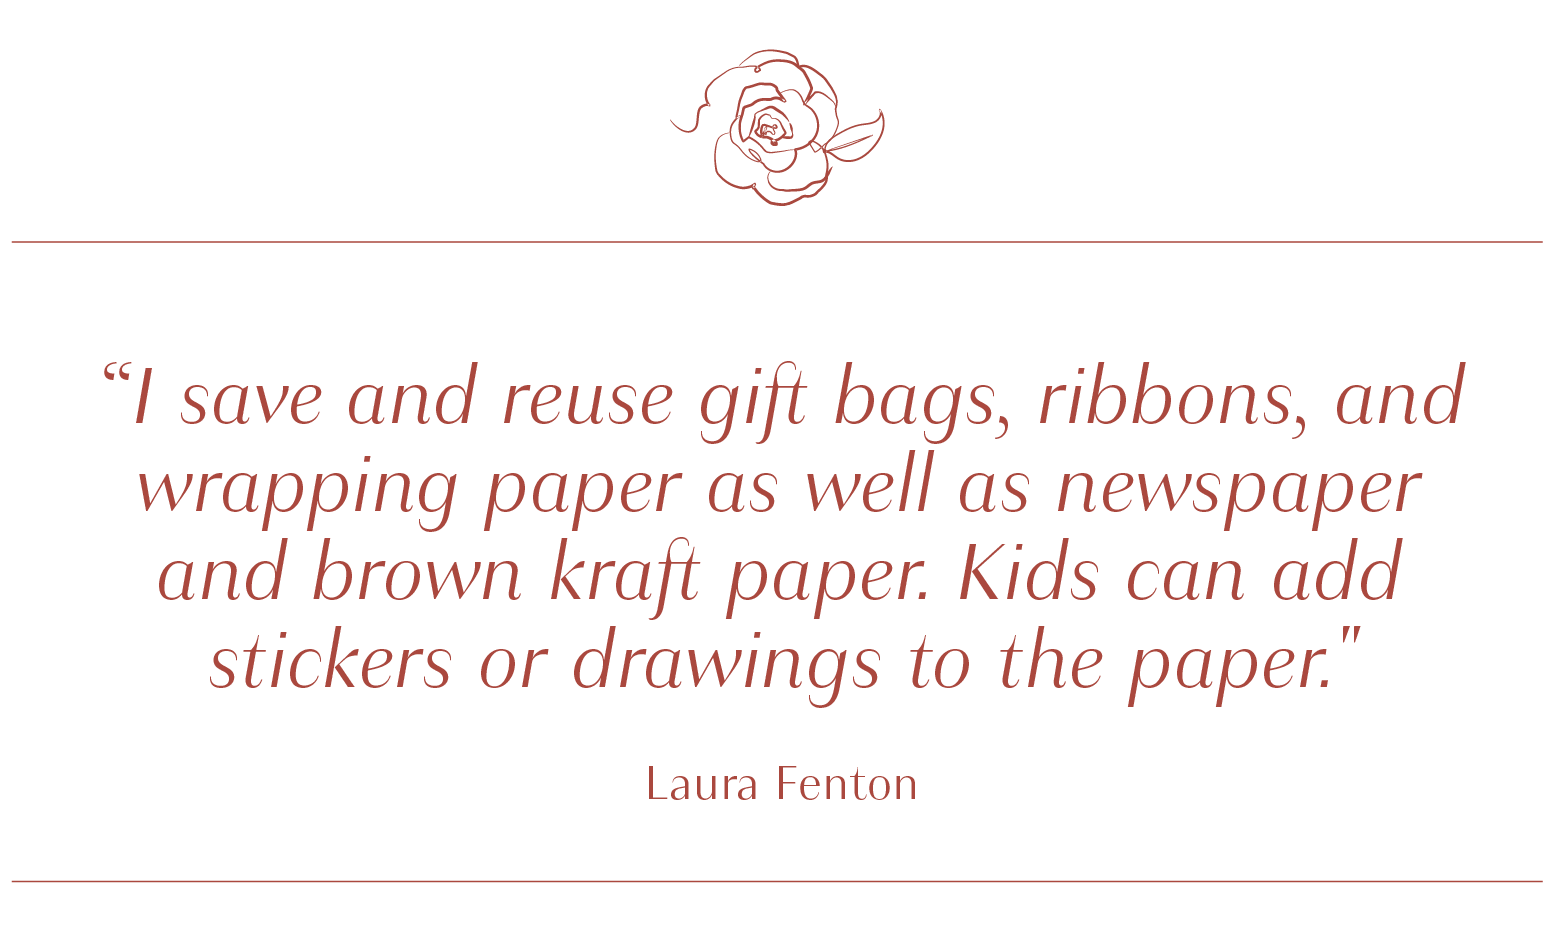 I save and reuse gift bags, ribbons, and wrapping paper as well as newspaper and brown kraft paper. Kids can add stickers or drawings
                to the paper. - Laura Fenton